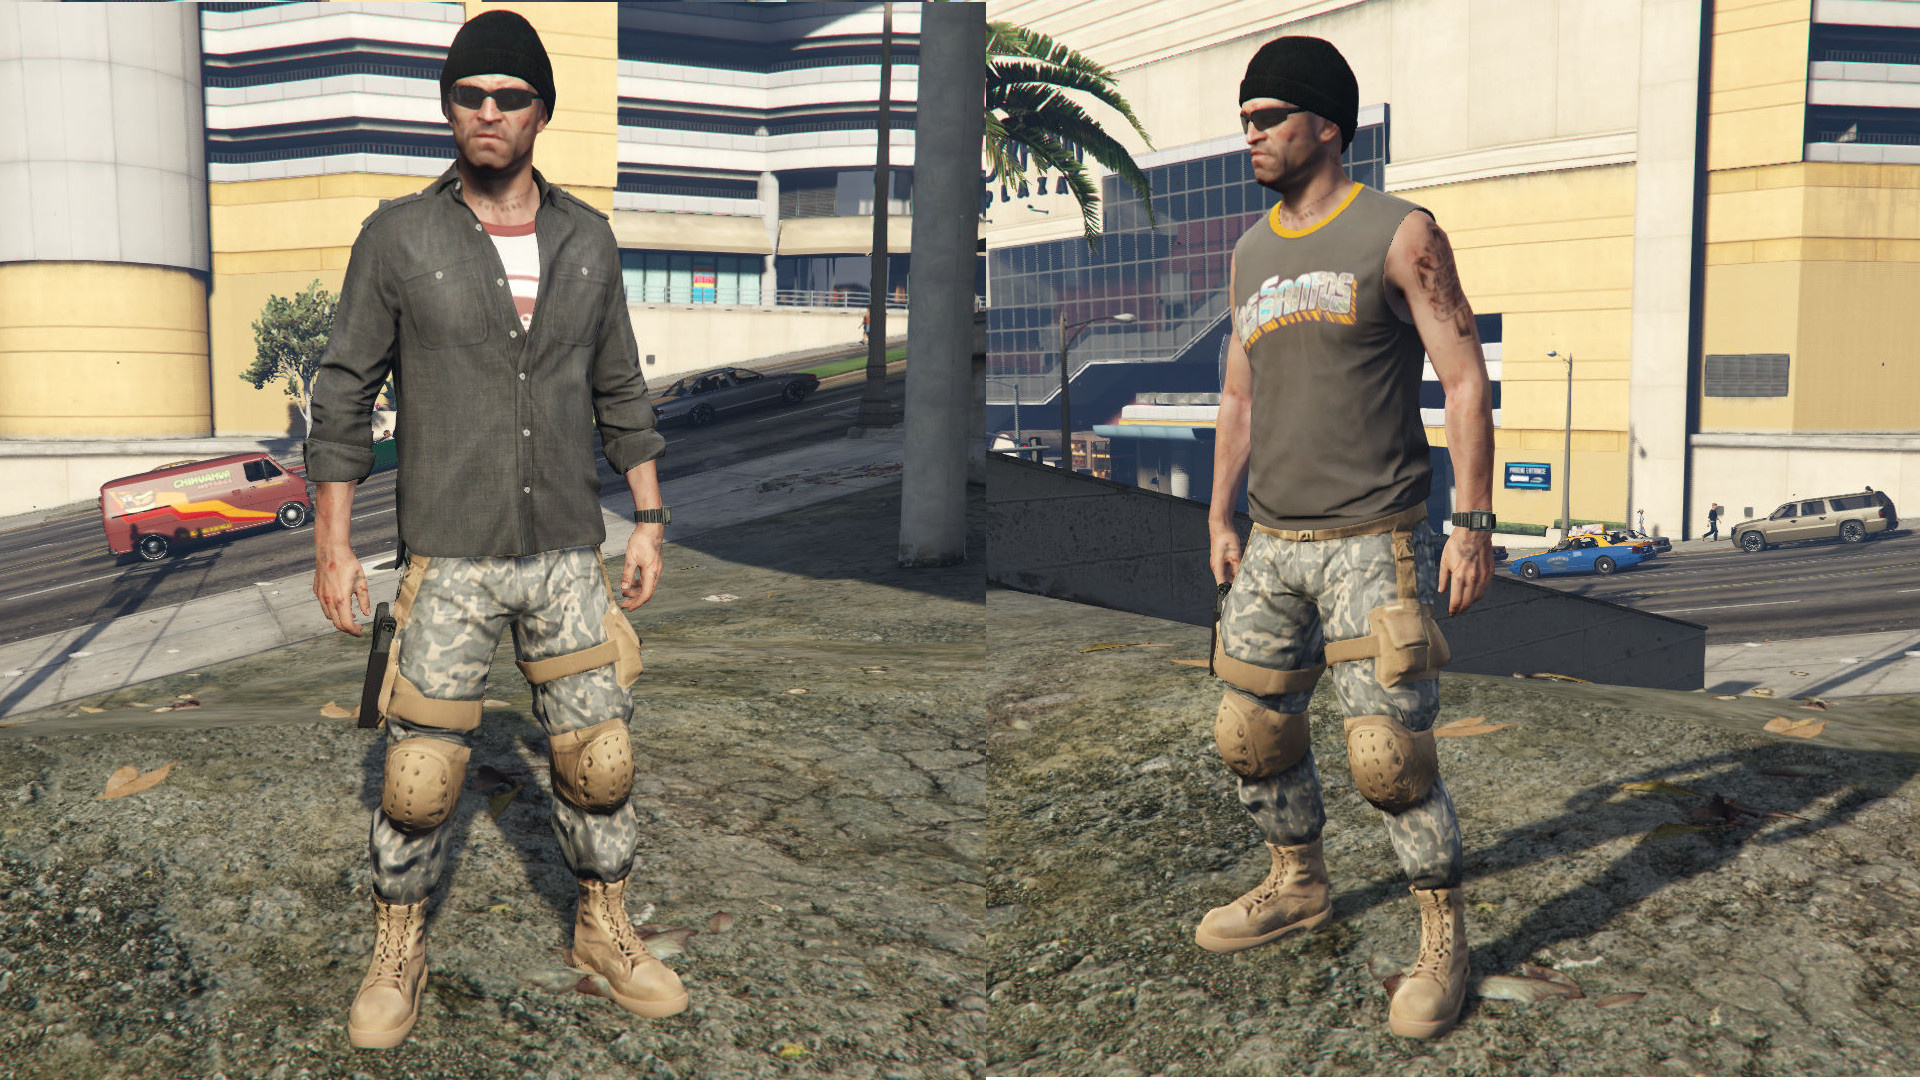 Merryweather gta 5 outfit фото 100